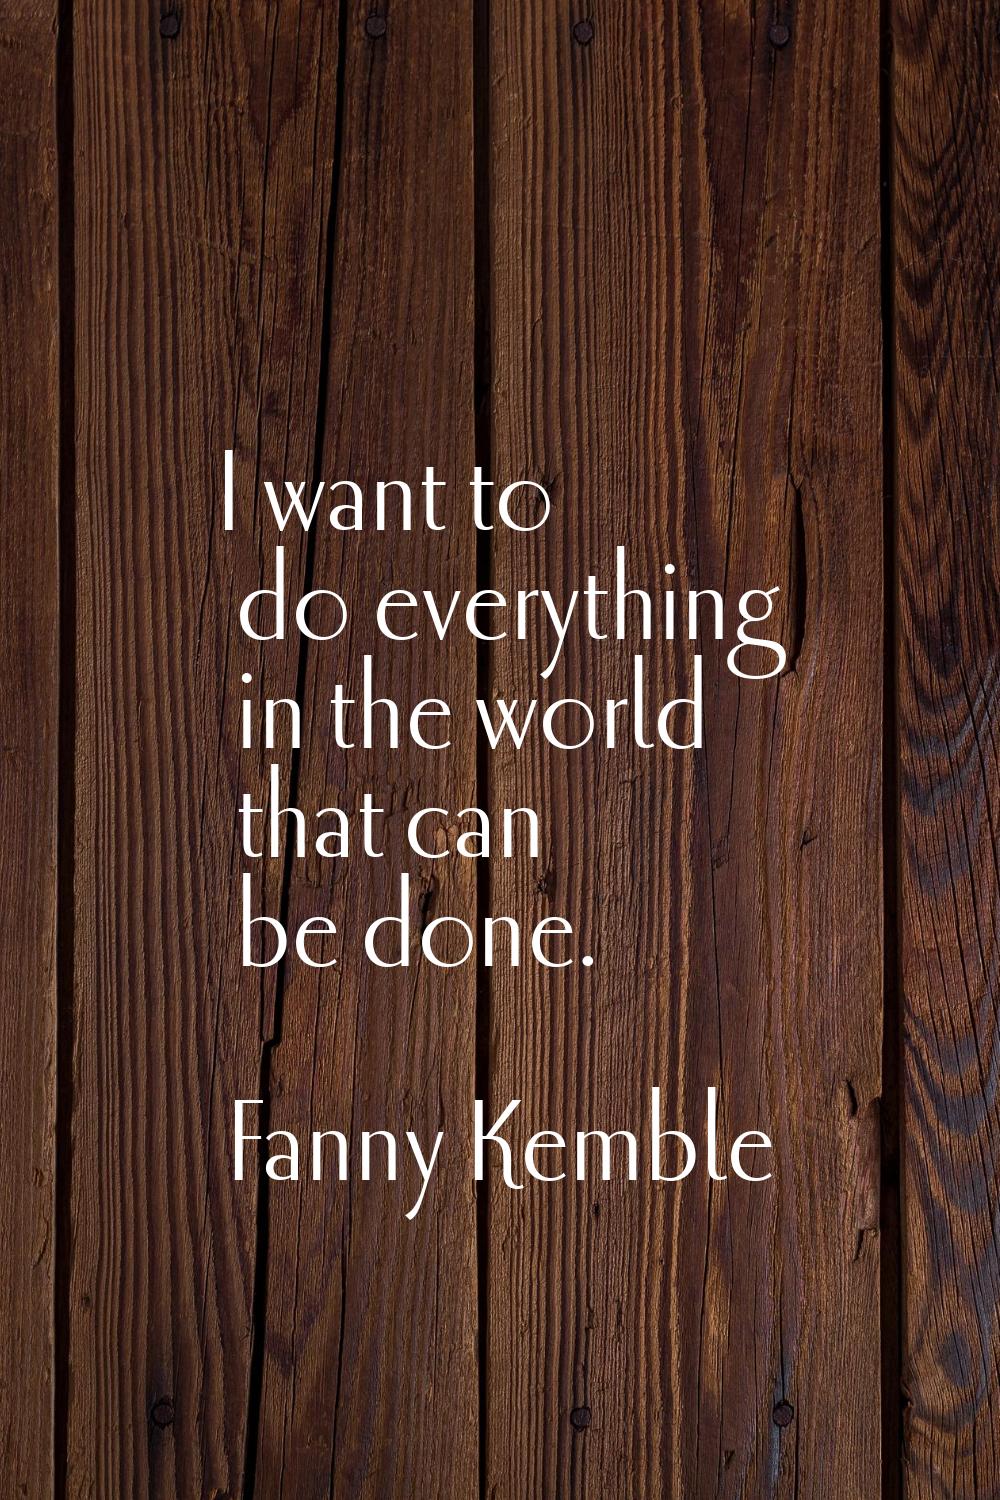 I want to do everything in the world that can be done.